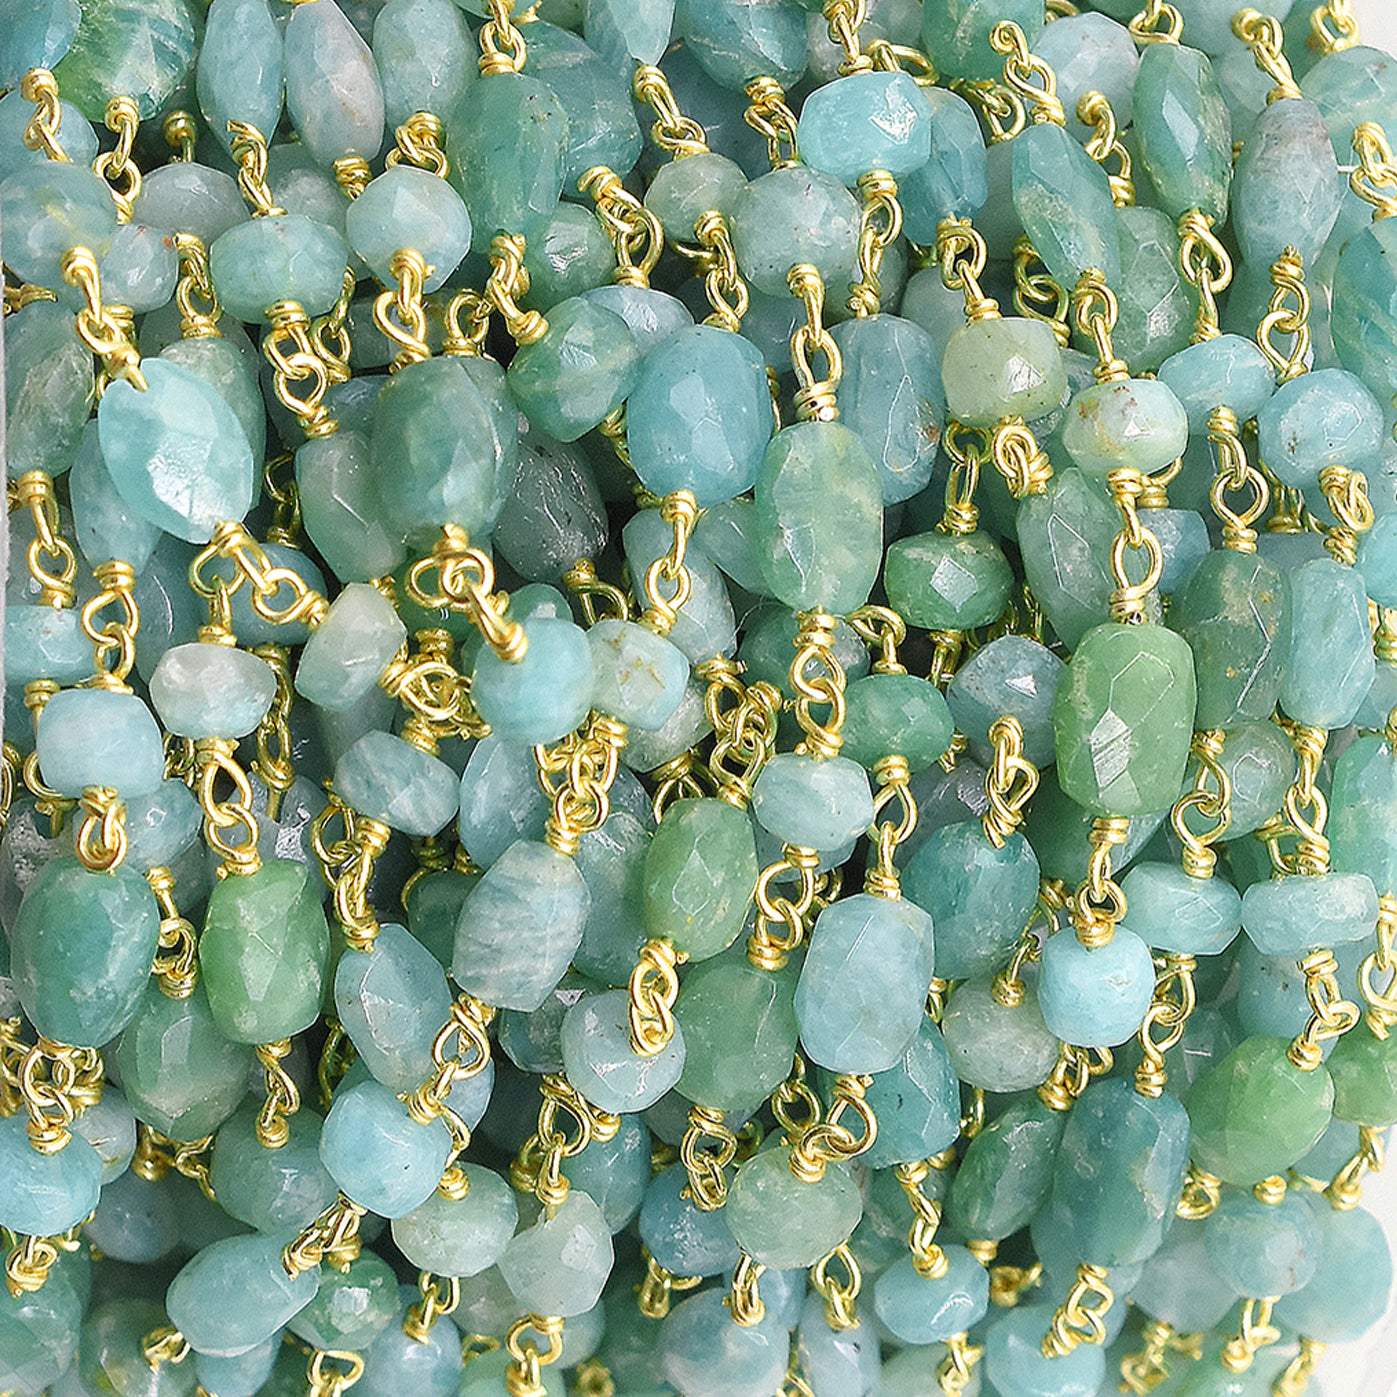 Amazonite 8X6 MM Oval Nuggets & 3To 4 MM Rondelle Faceted Sterling Silver Vermeil Wire Wrapped Chain Sold by Foot - Jaipur Gem Factory